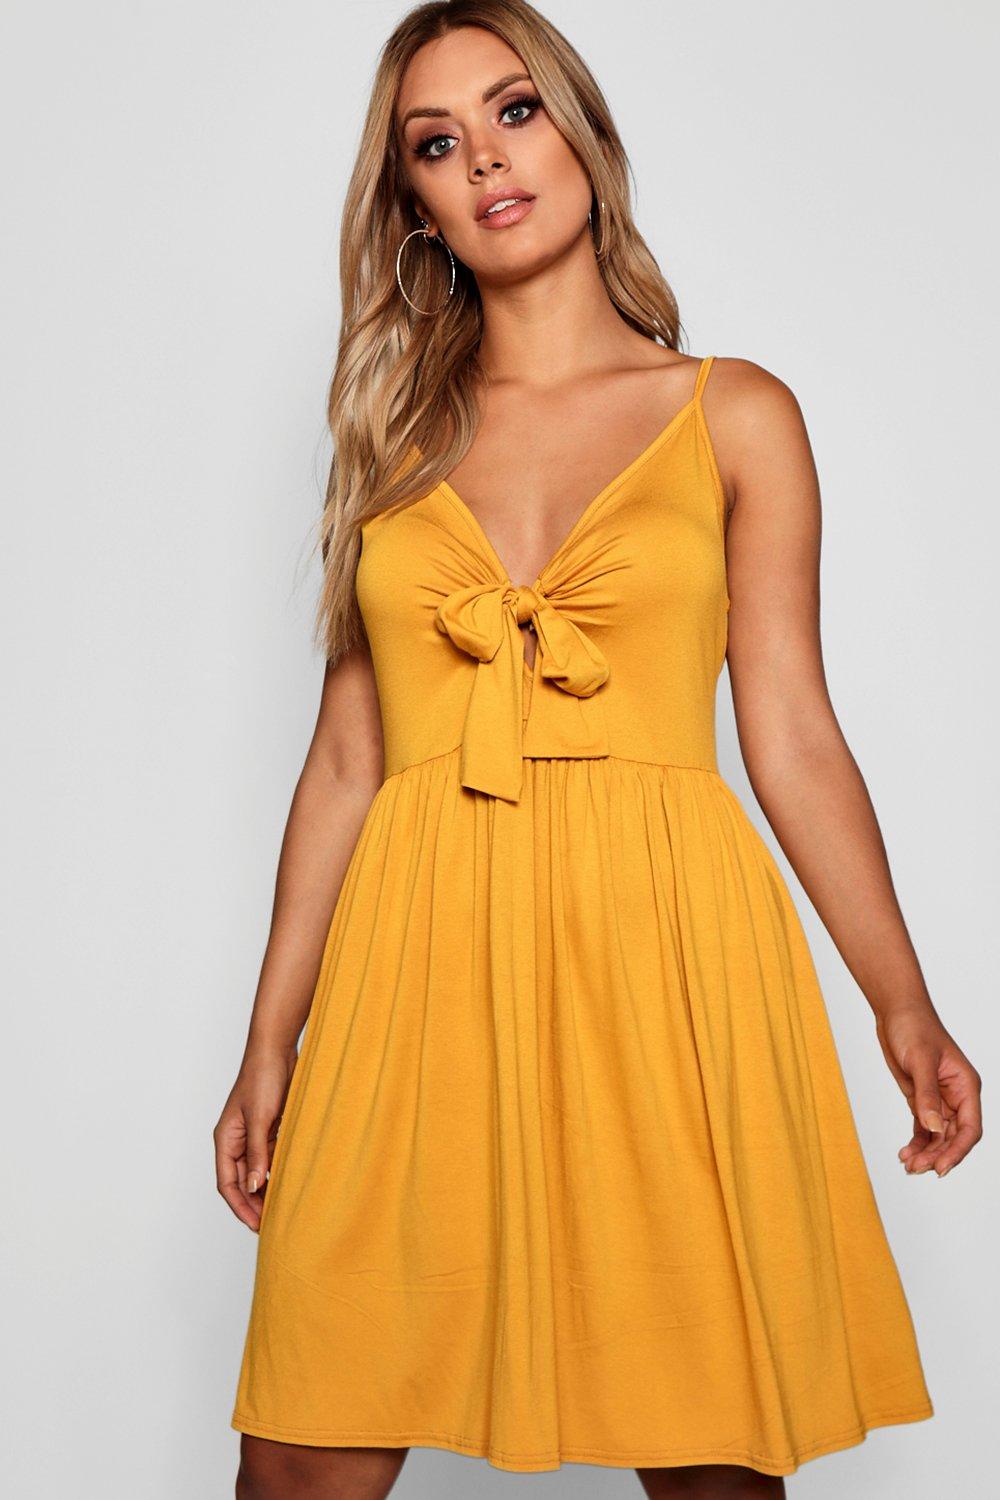 plus size yellow and white dress